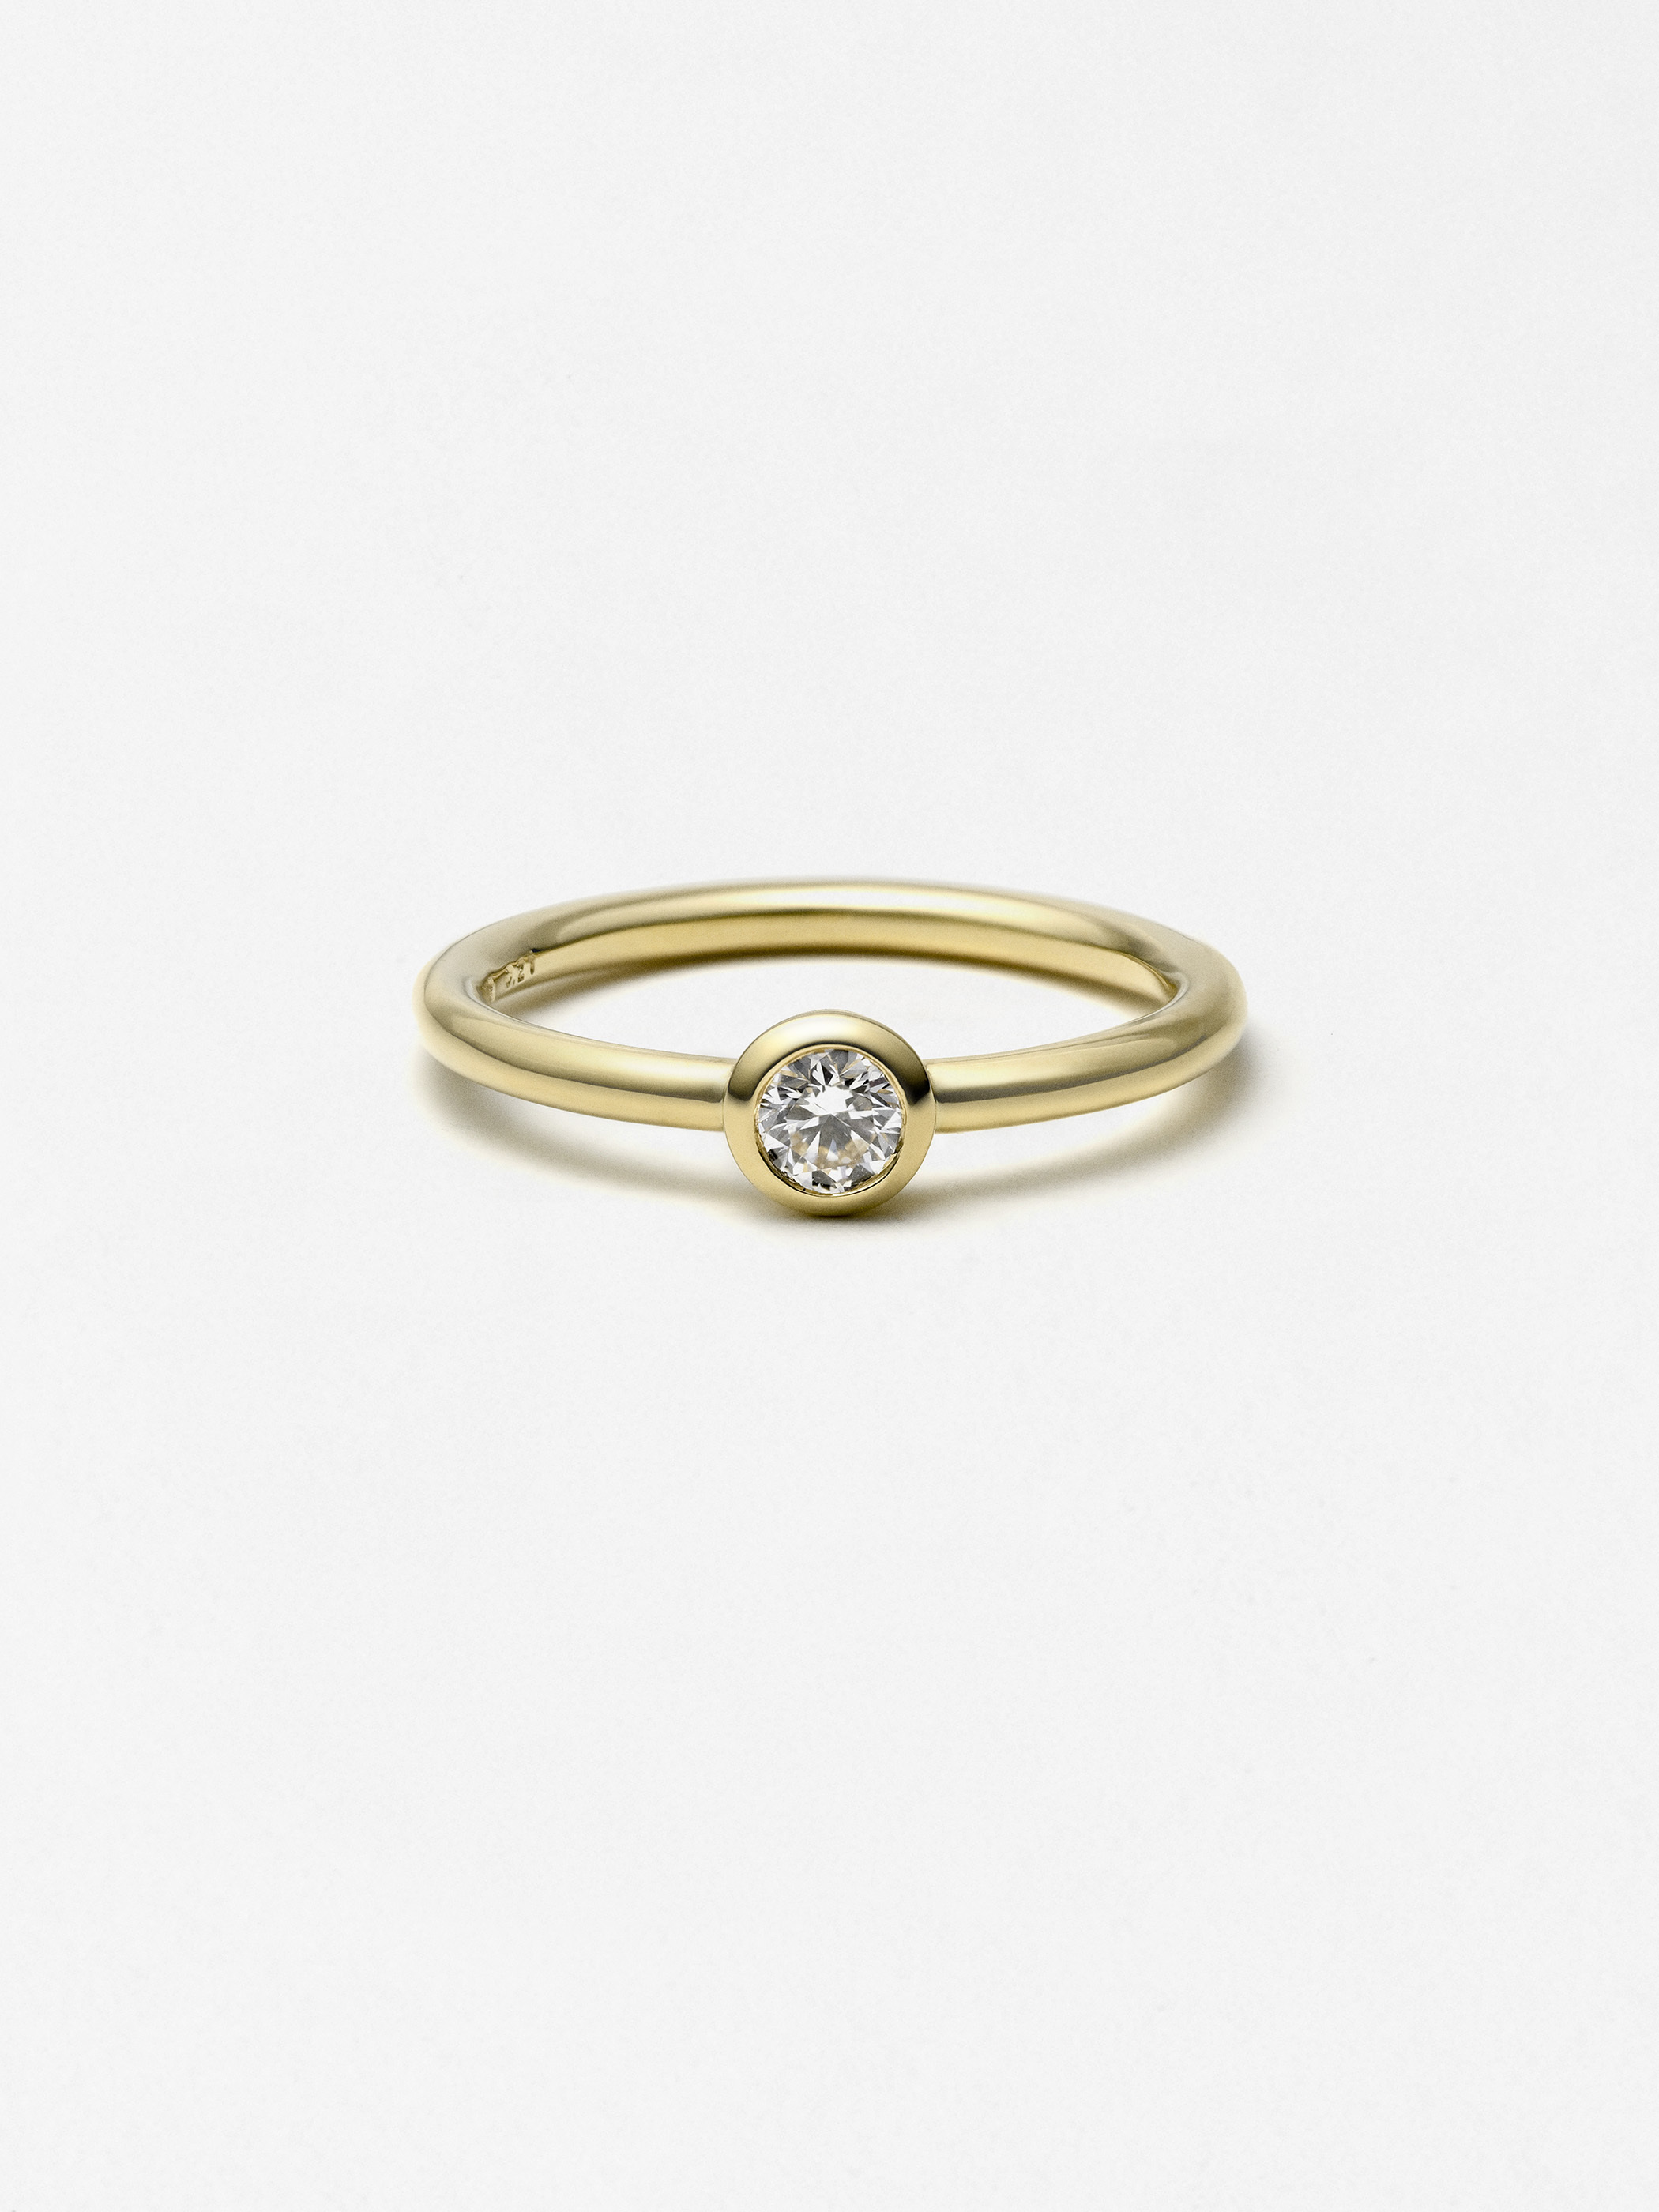 DIAMOND RING SOLITAIRE YG 0.2ct